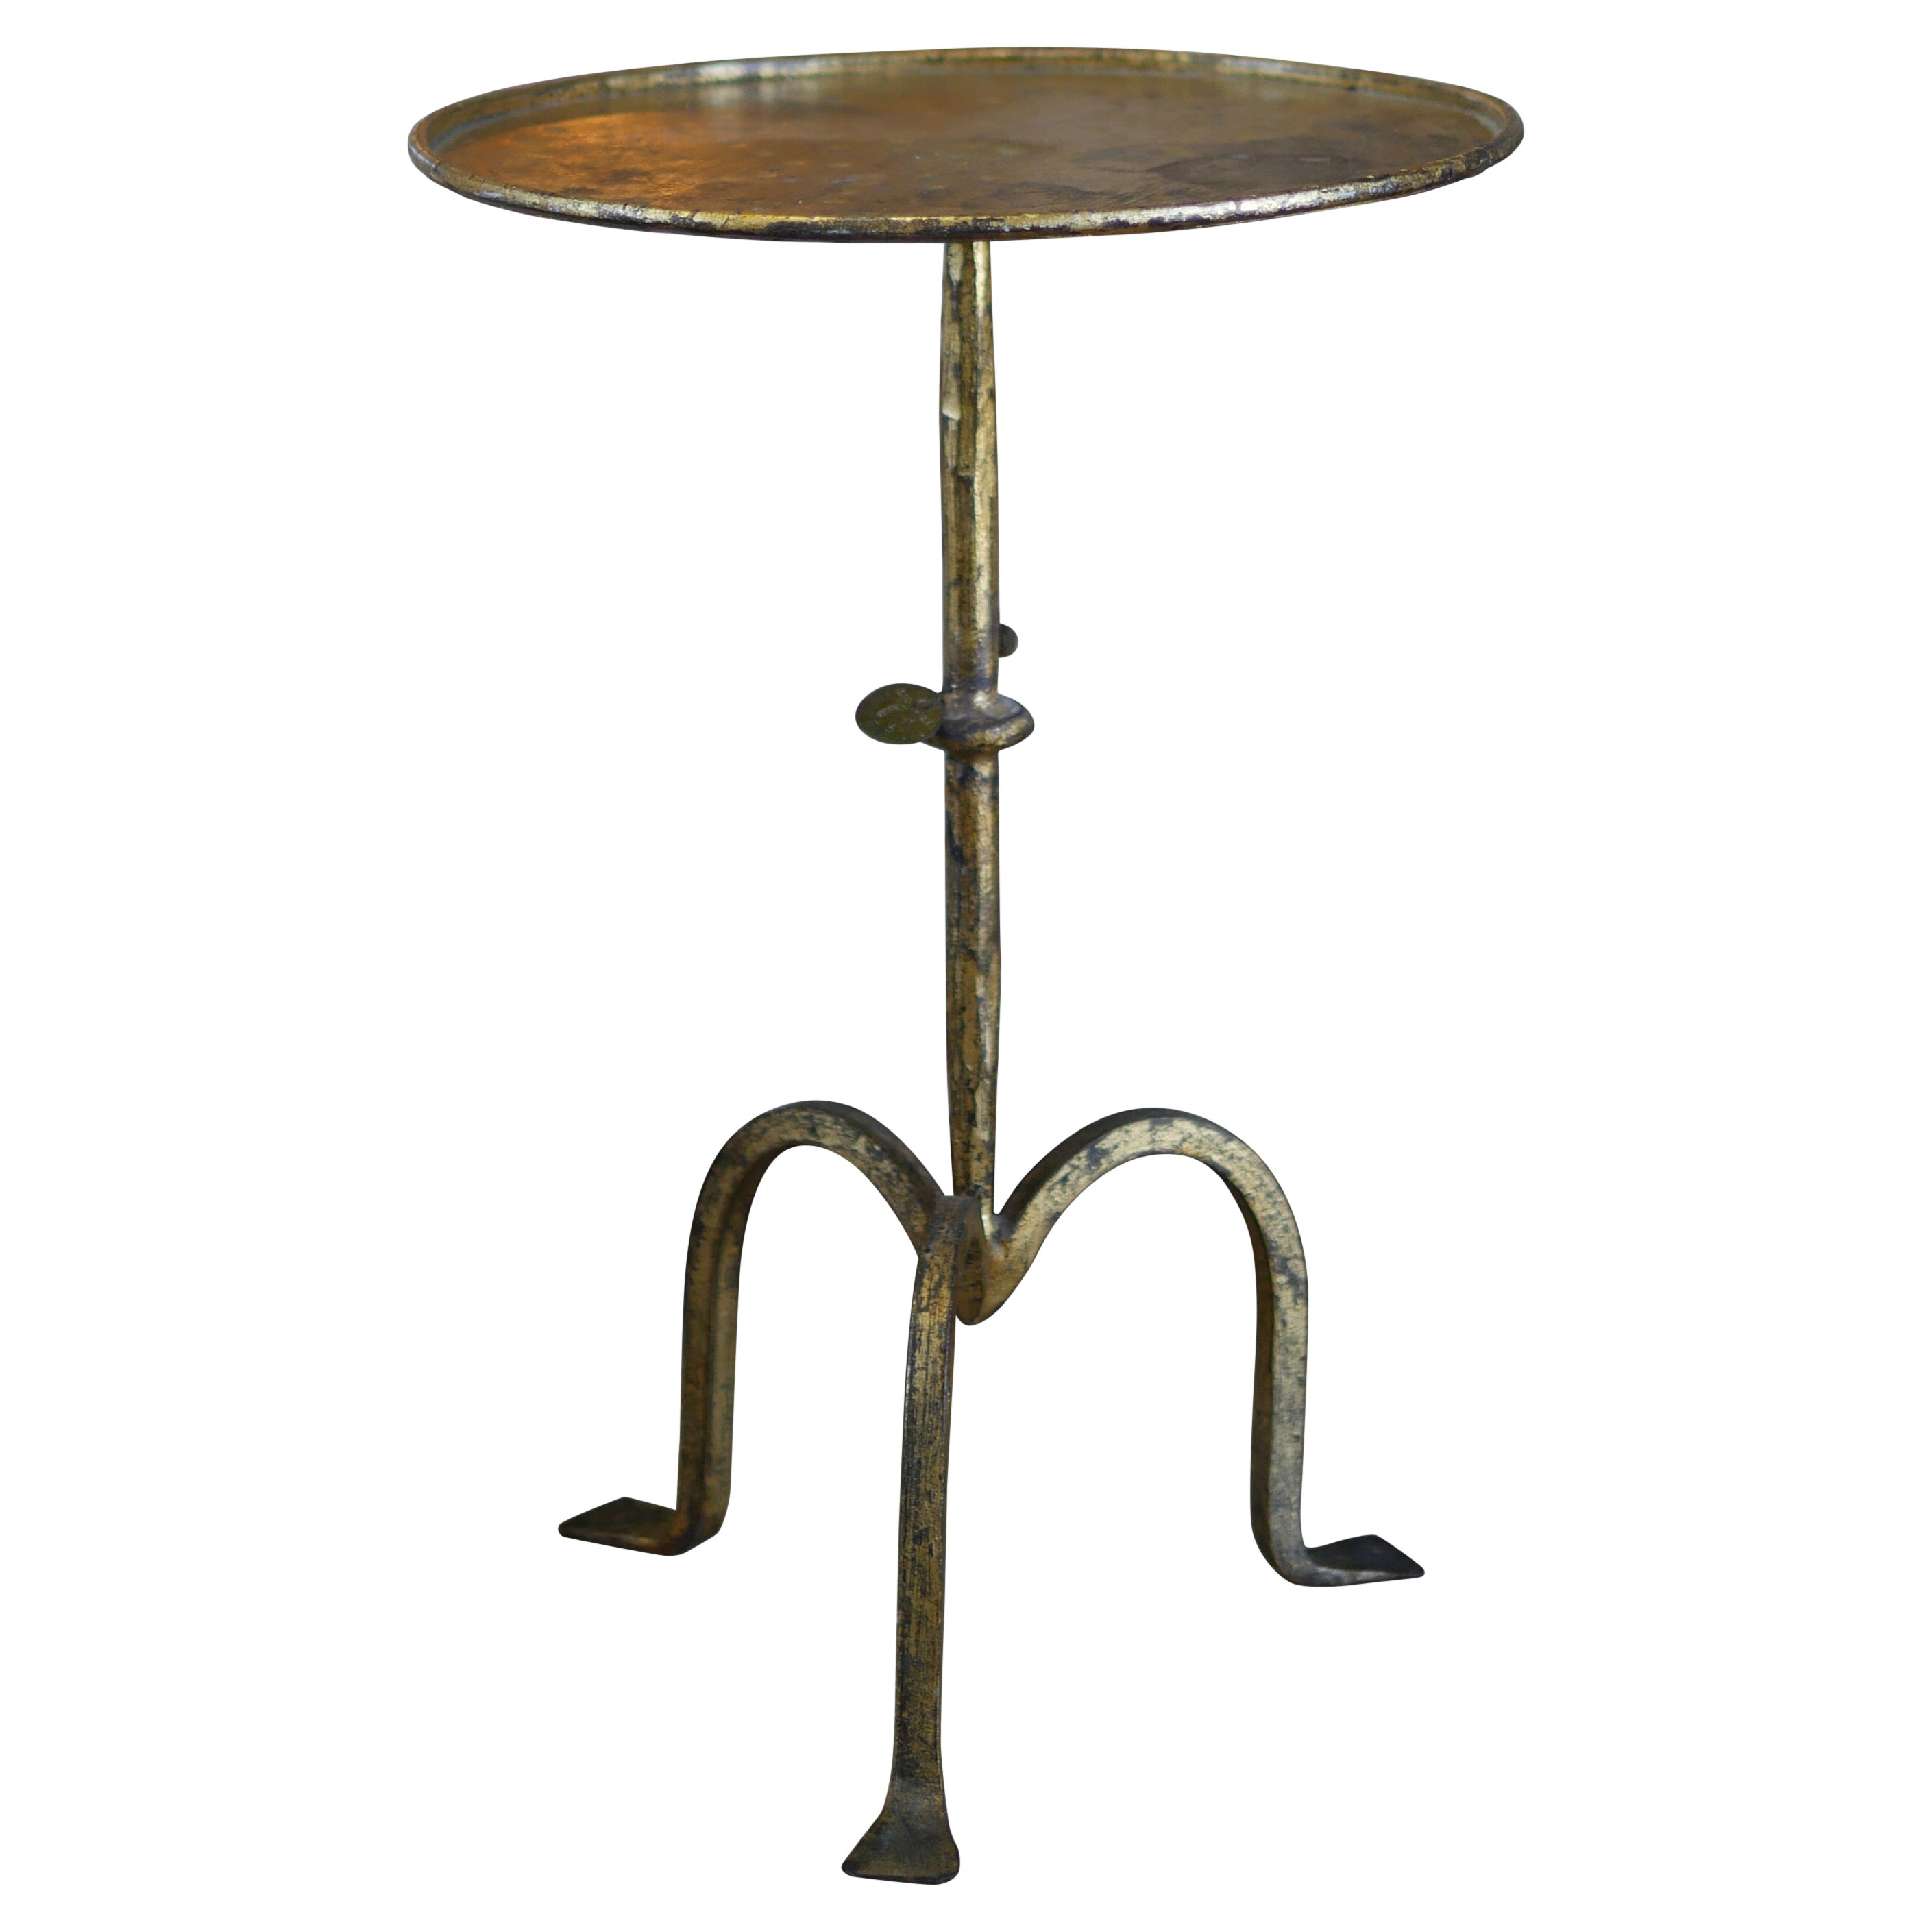 Spanish 1940s Gilt Side Table / Drinks Table / Martini Table, Wrought Iron